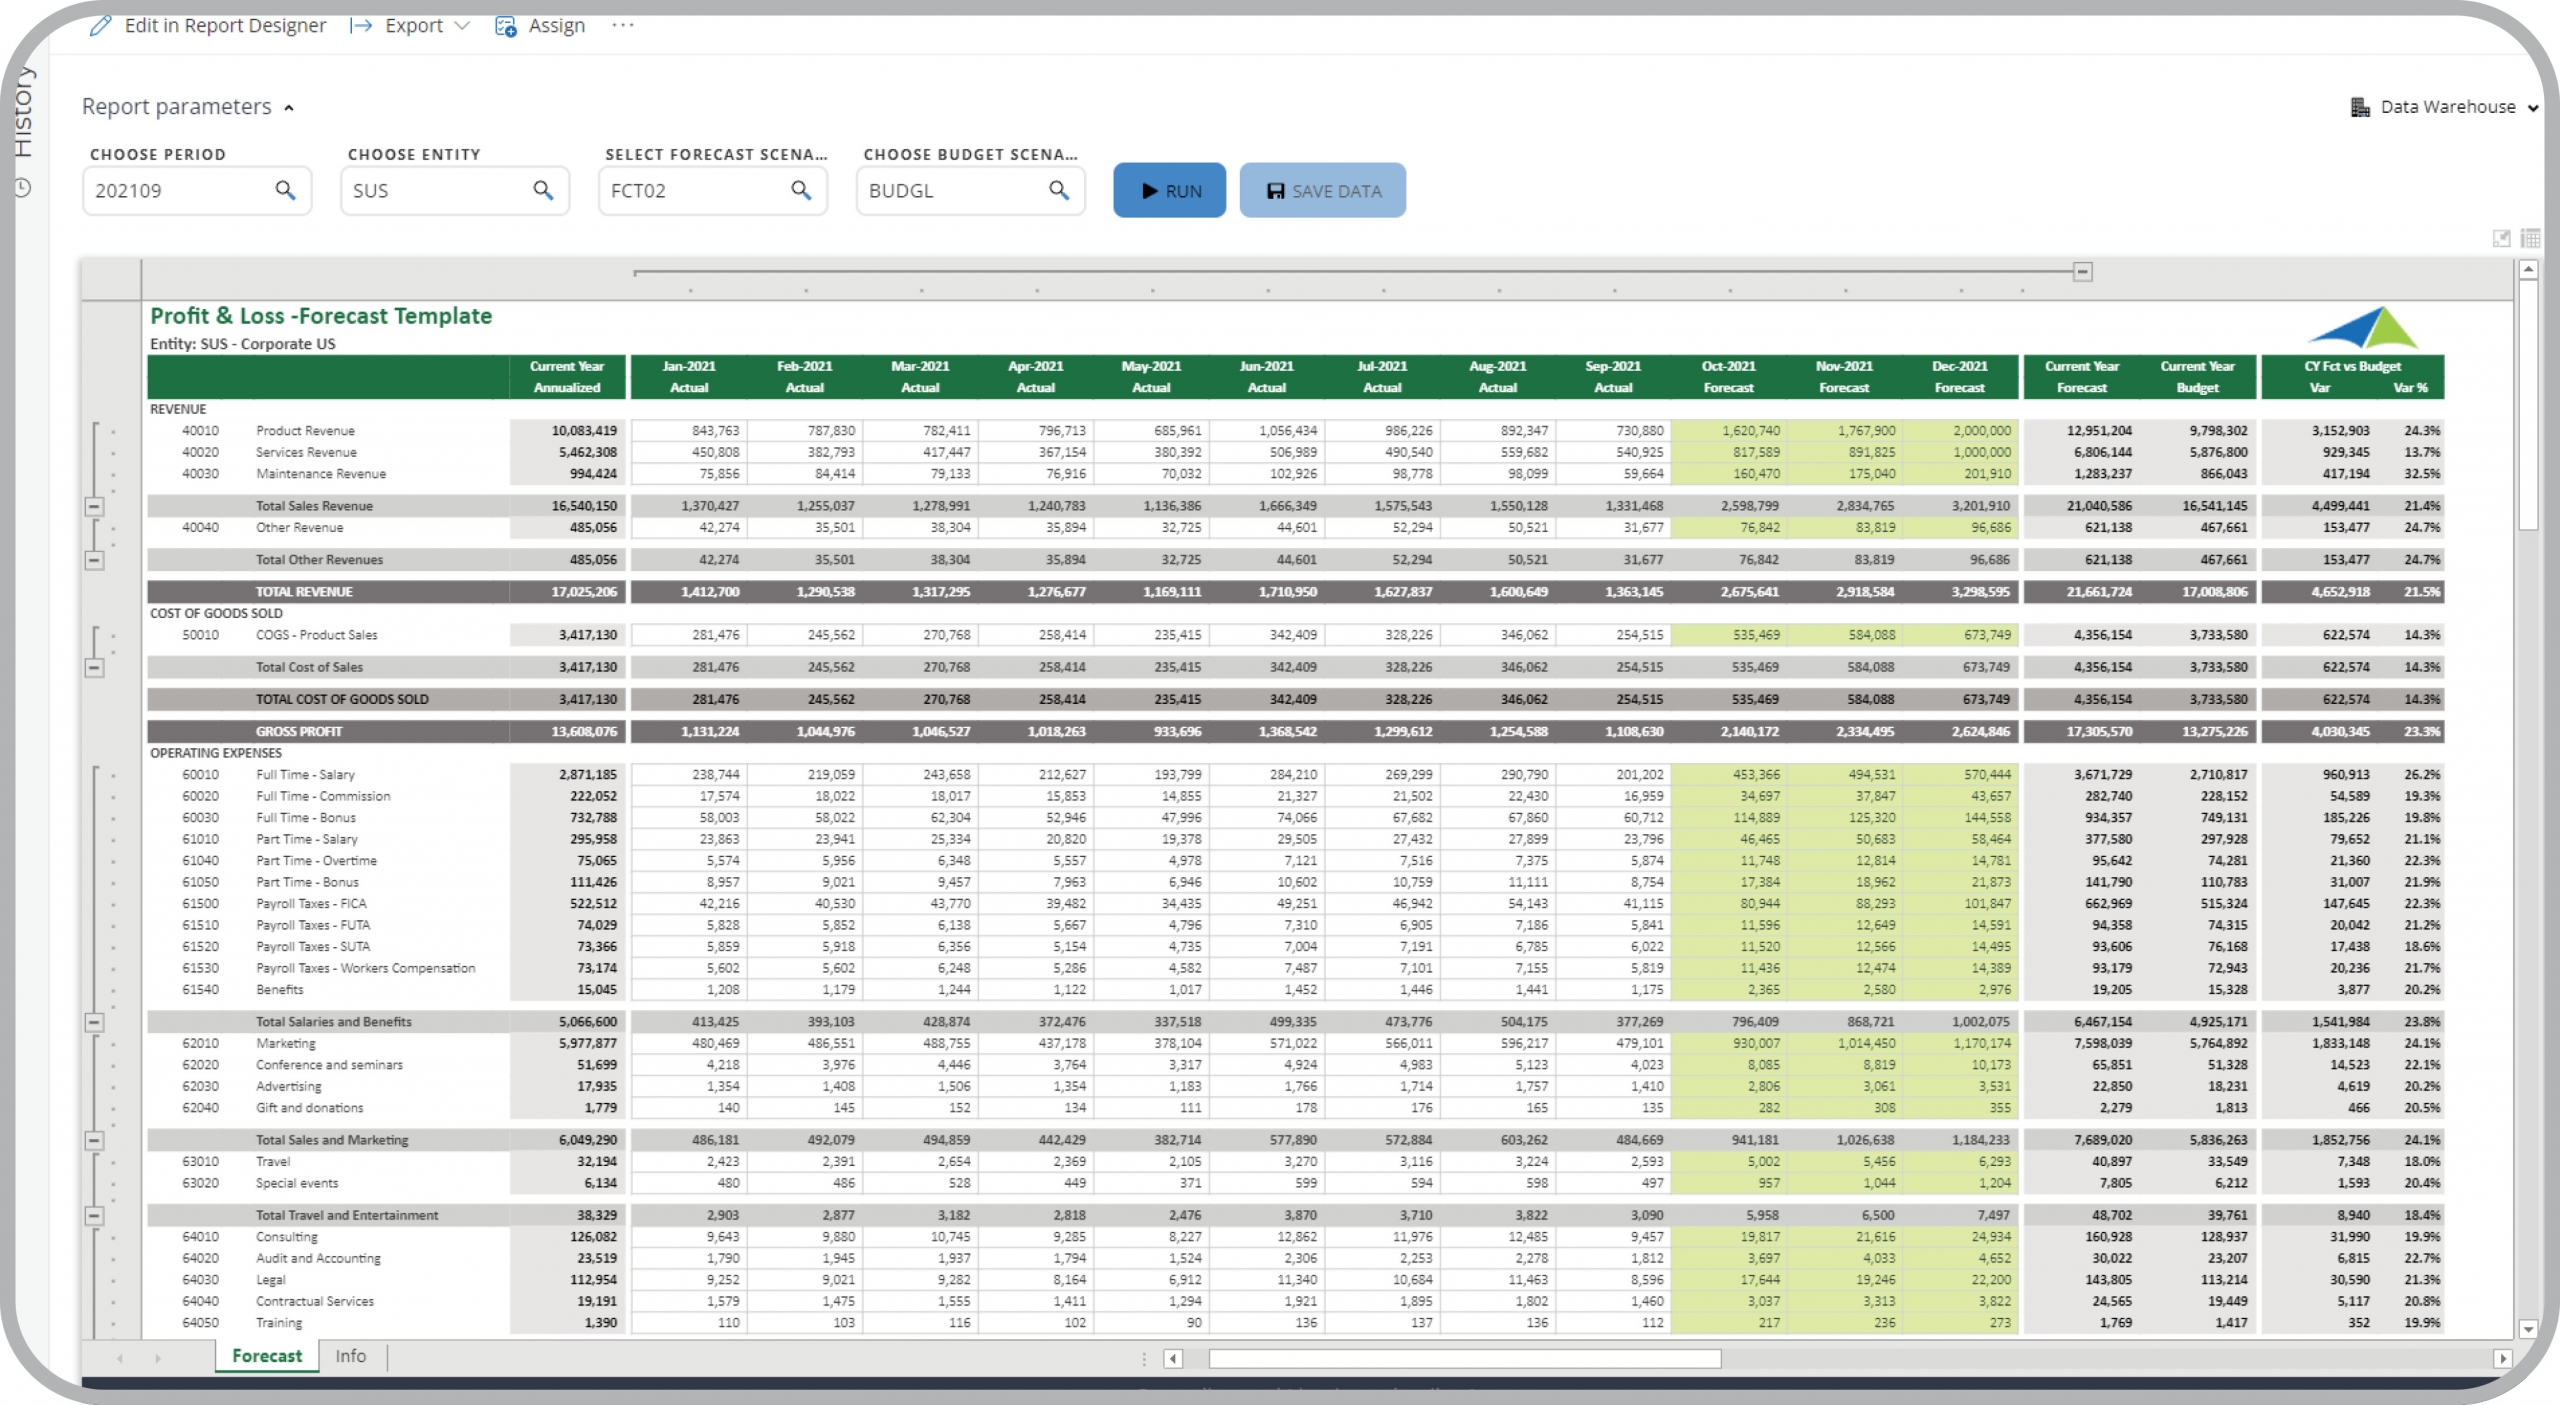 Example of a Profit & Loss Forecast Input Template to Streamline the Forecasting Process